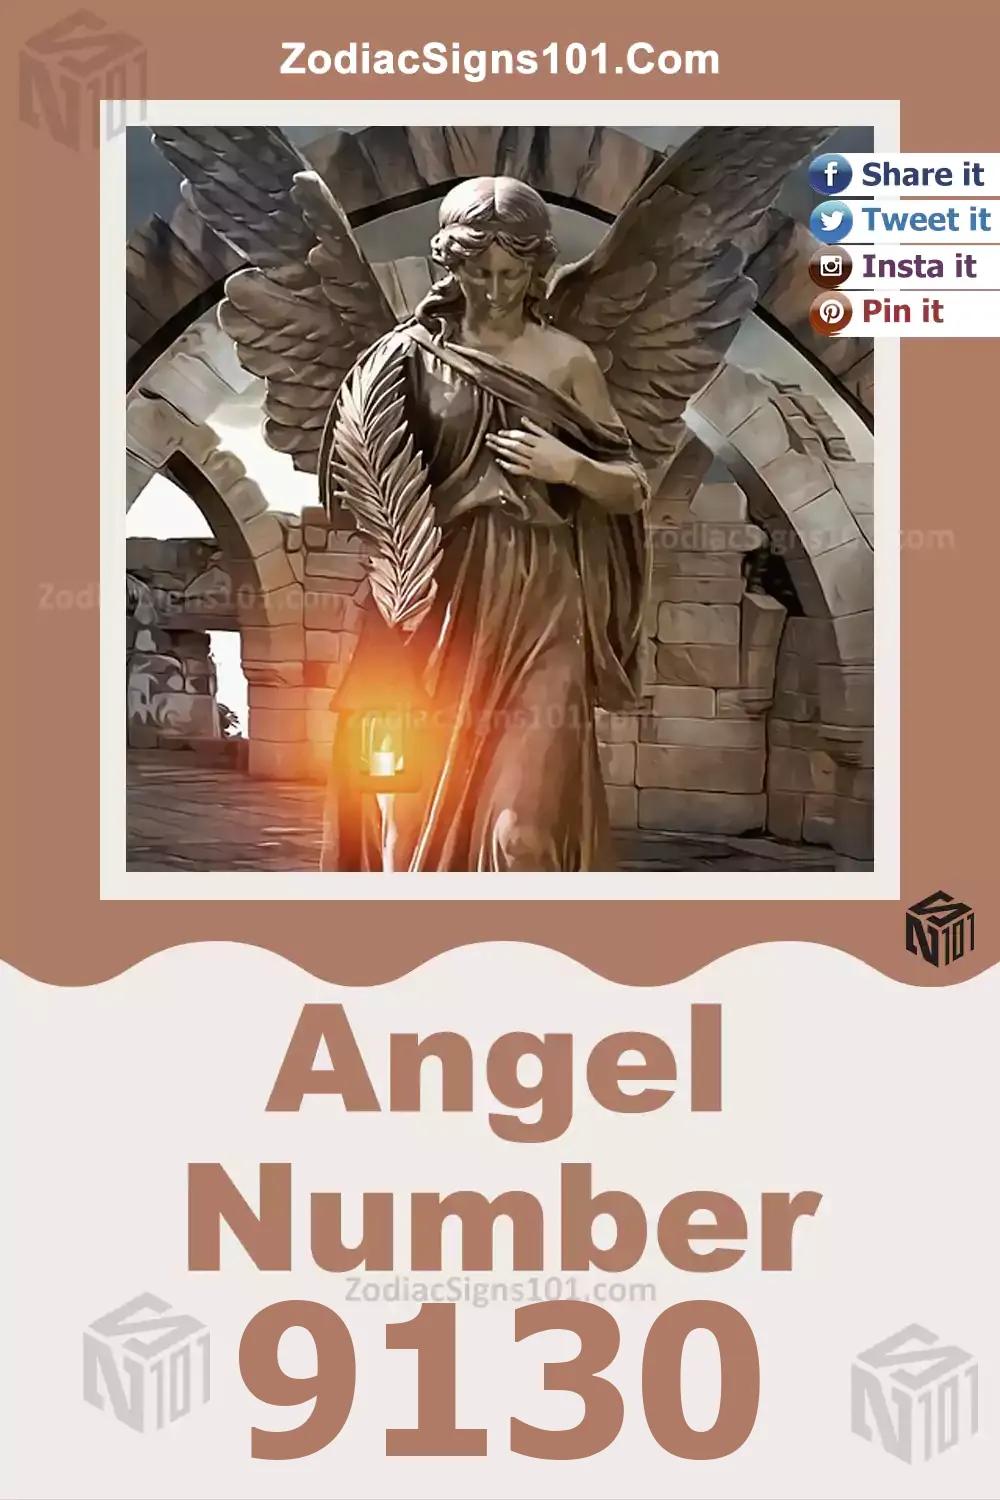 9130 Angel Number Meaning